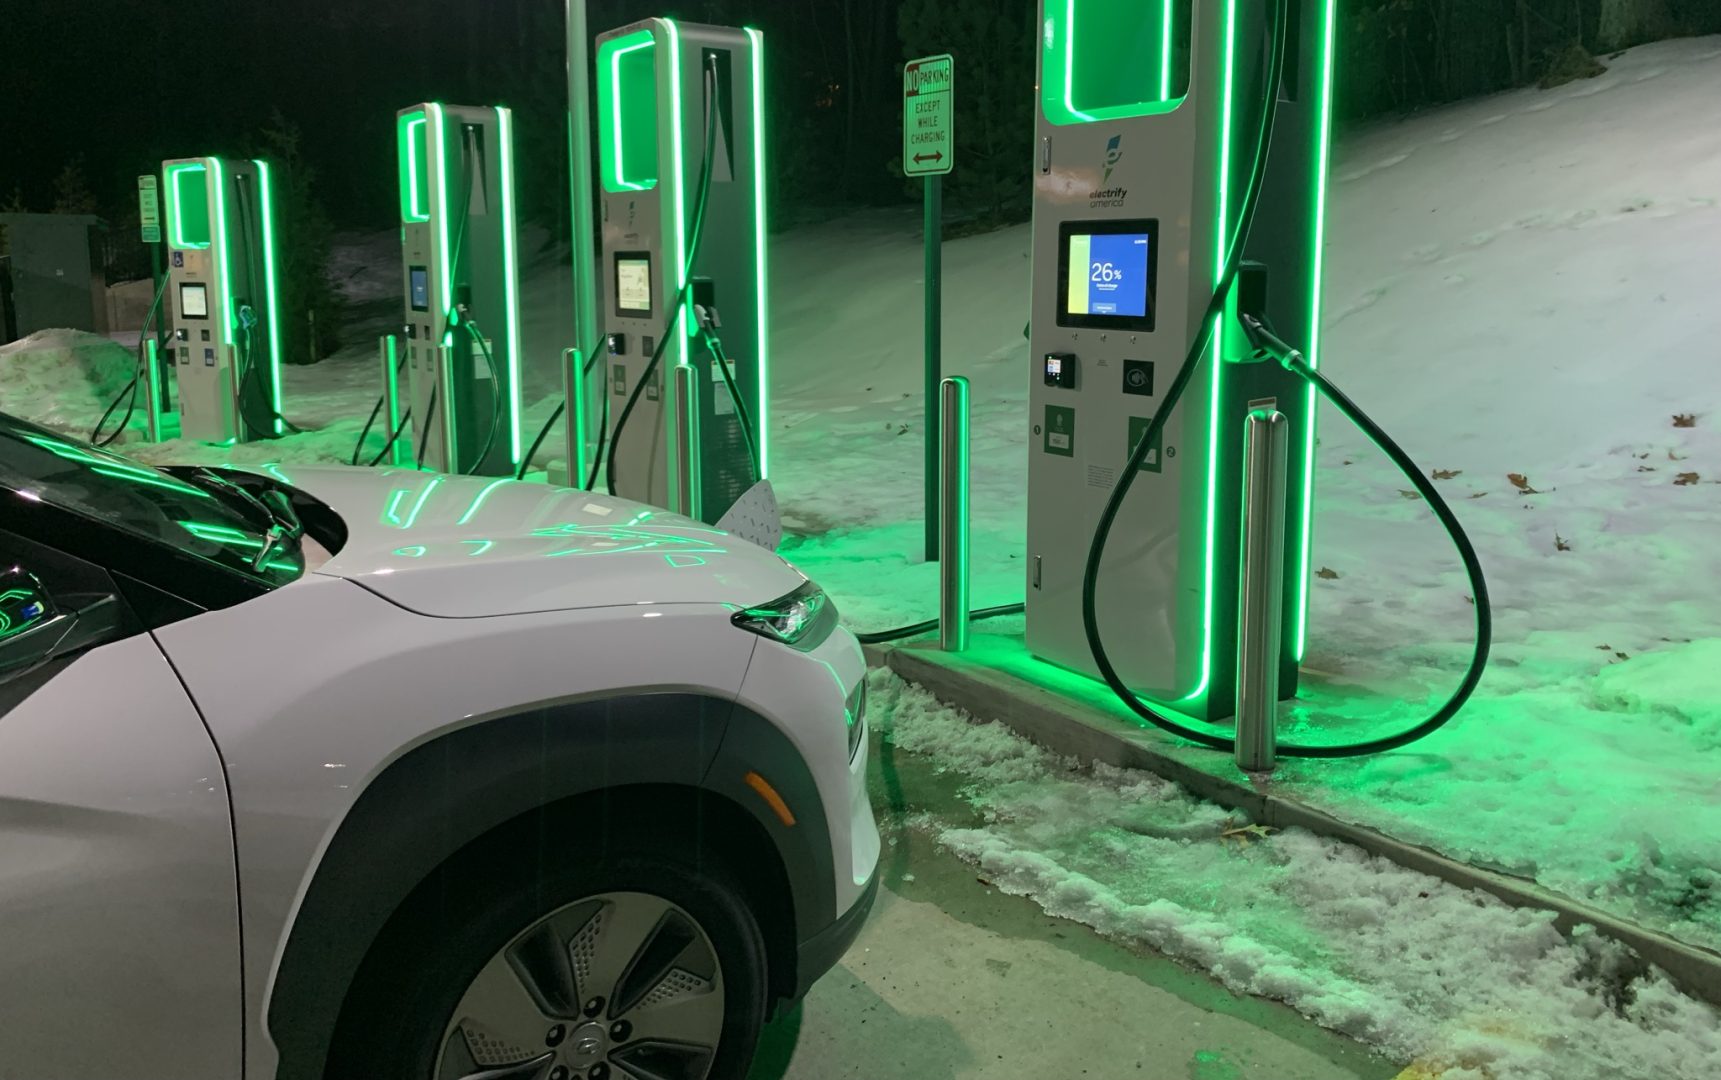 A Hyundai Kona Electric vehicle charges in State College on Feb 12, 2022.